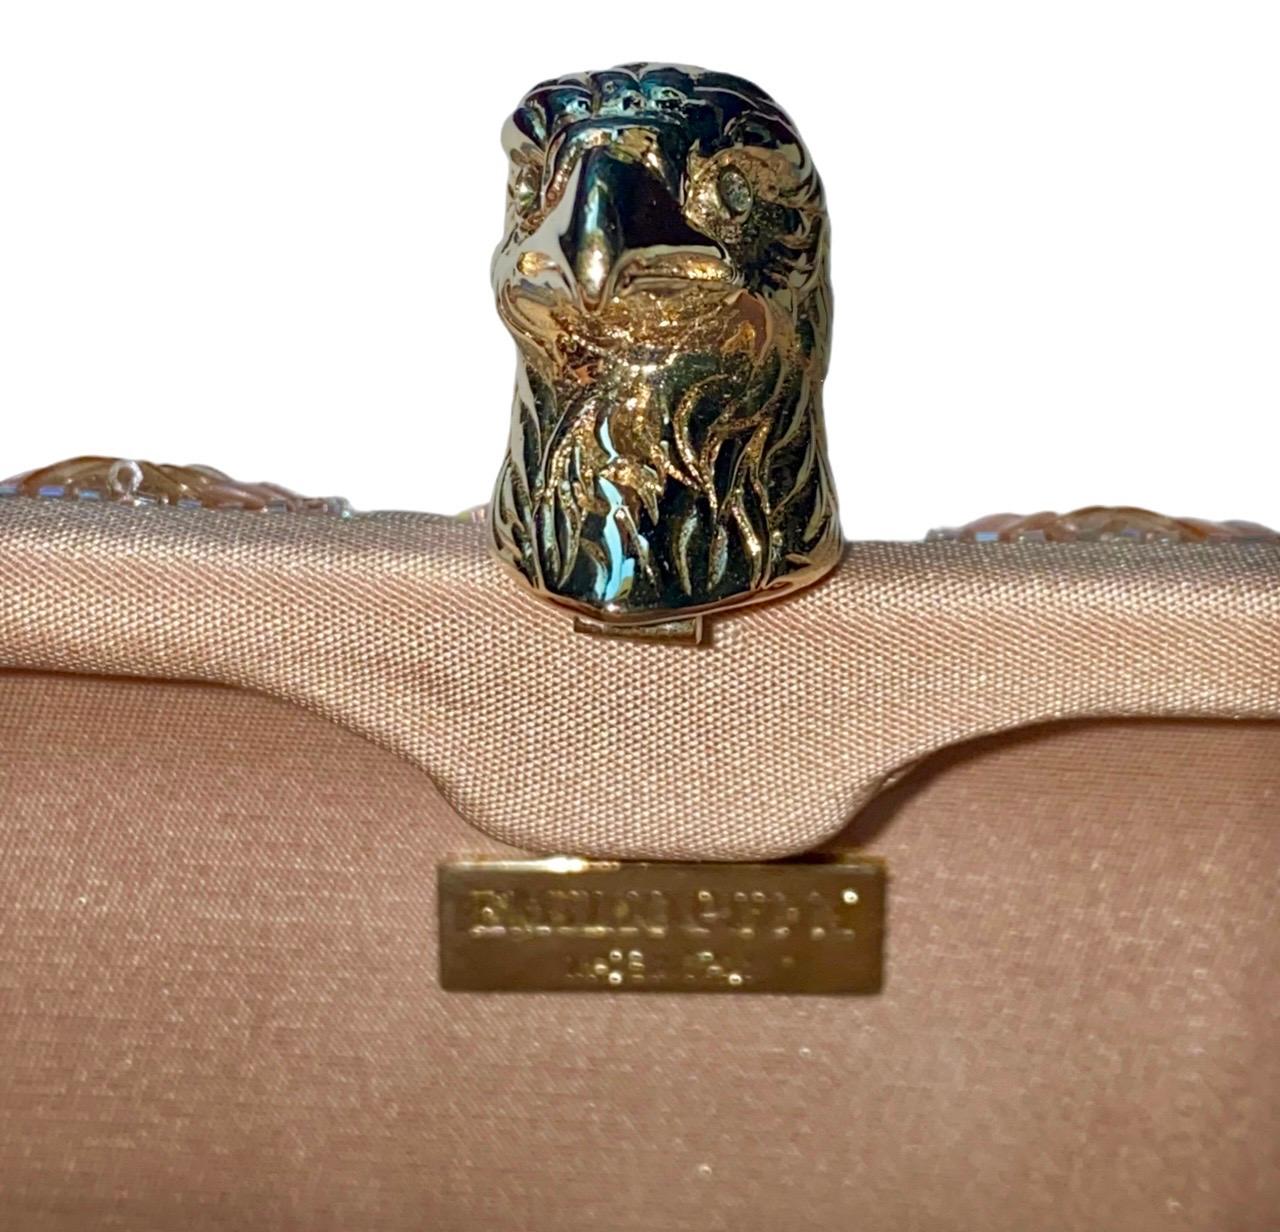 NEW Emilio Pucci by Peter Dundas Embellished Sequin Eagle Head Clutch Bag For Sale 1